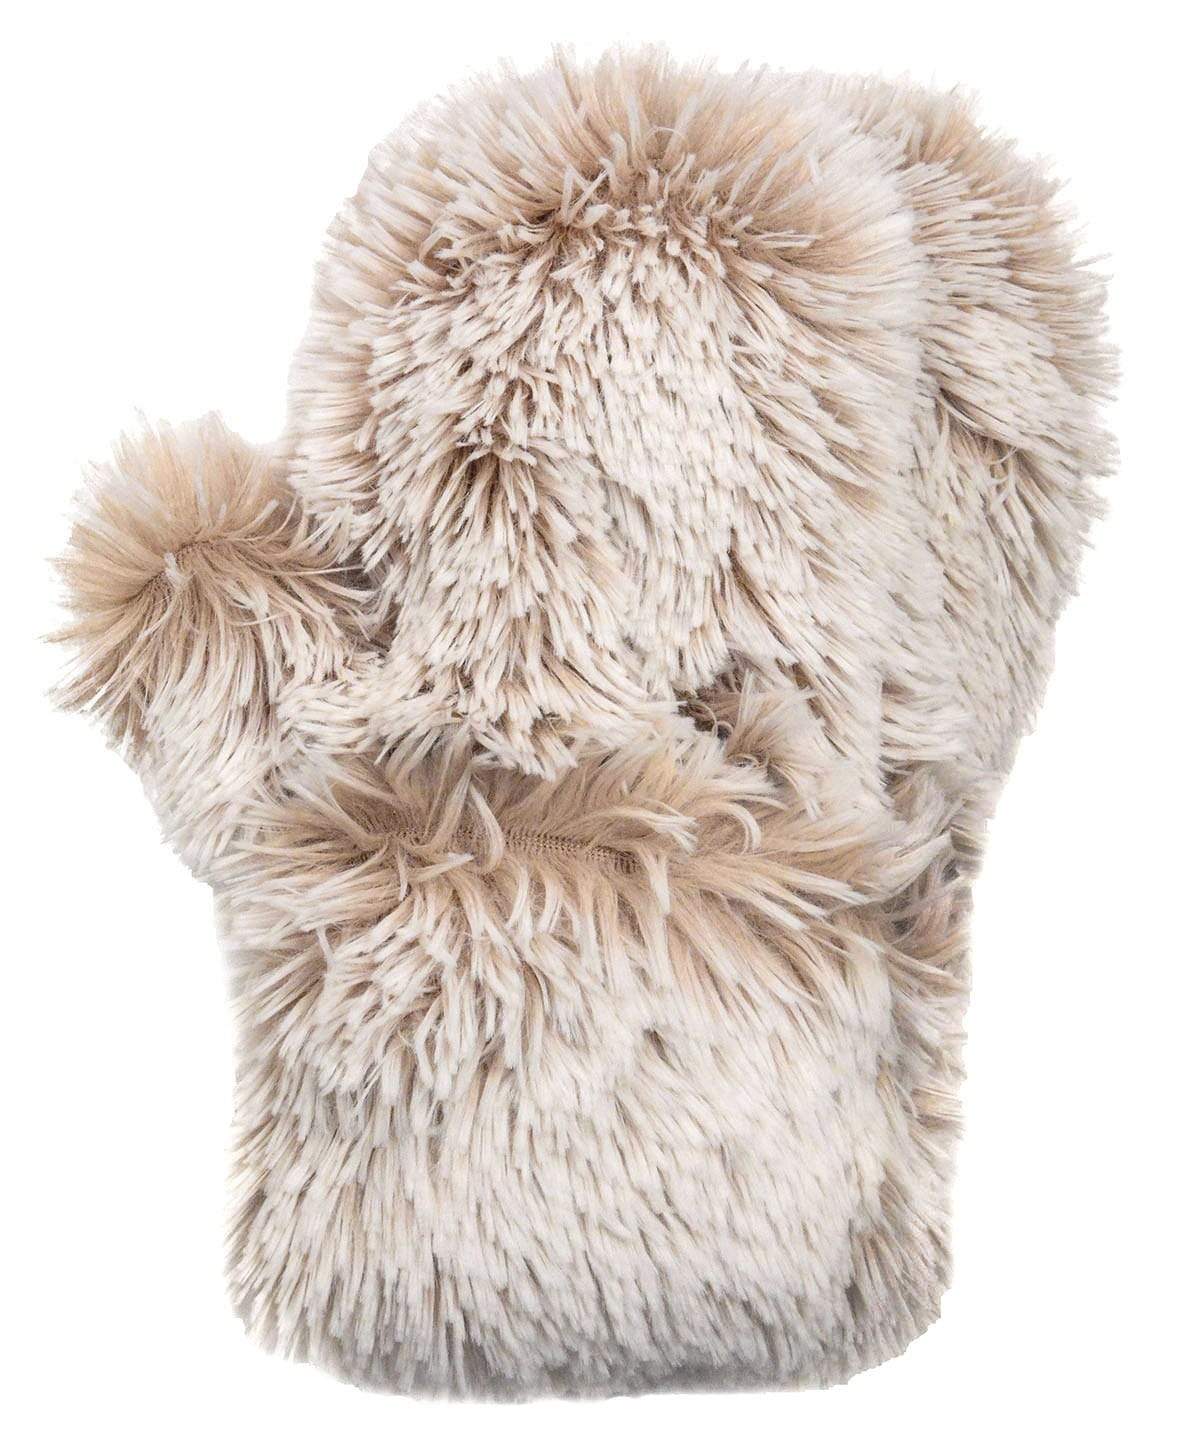 Women’s Product shot of Mittens. Gauntlets, Mitts | foxy beach, tan with white tips long hair Faux Fur | Handmade by Pandemonium Millinery Seattle, WA USA